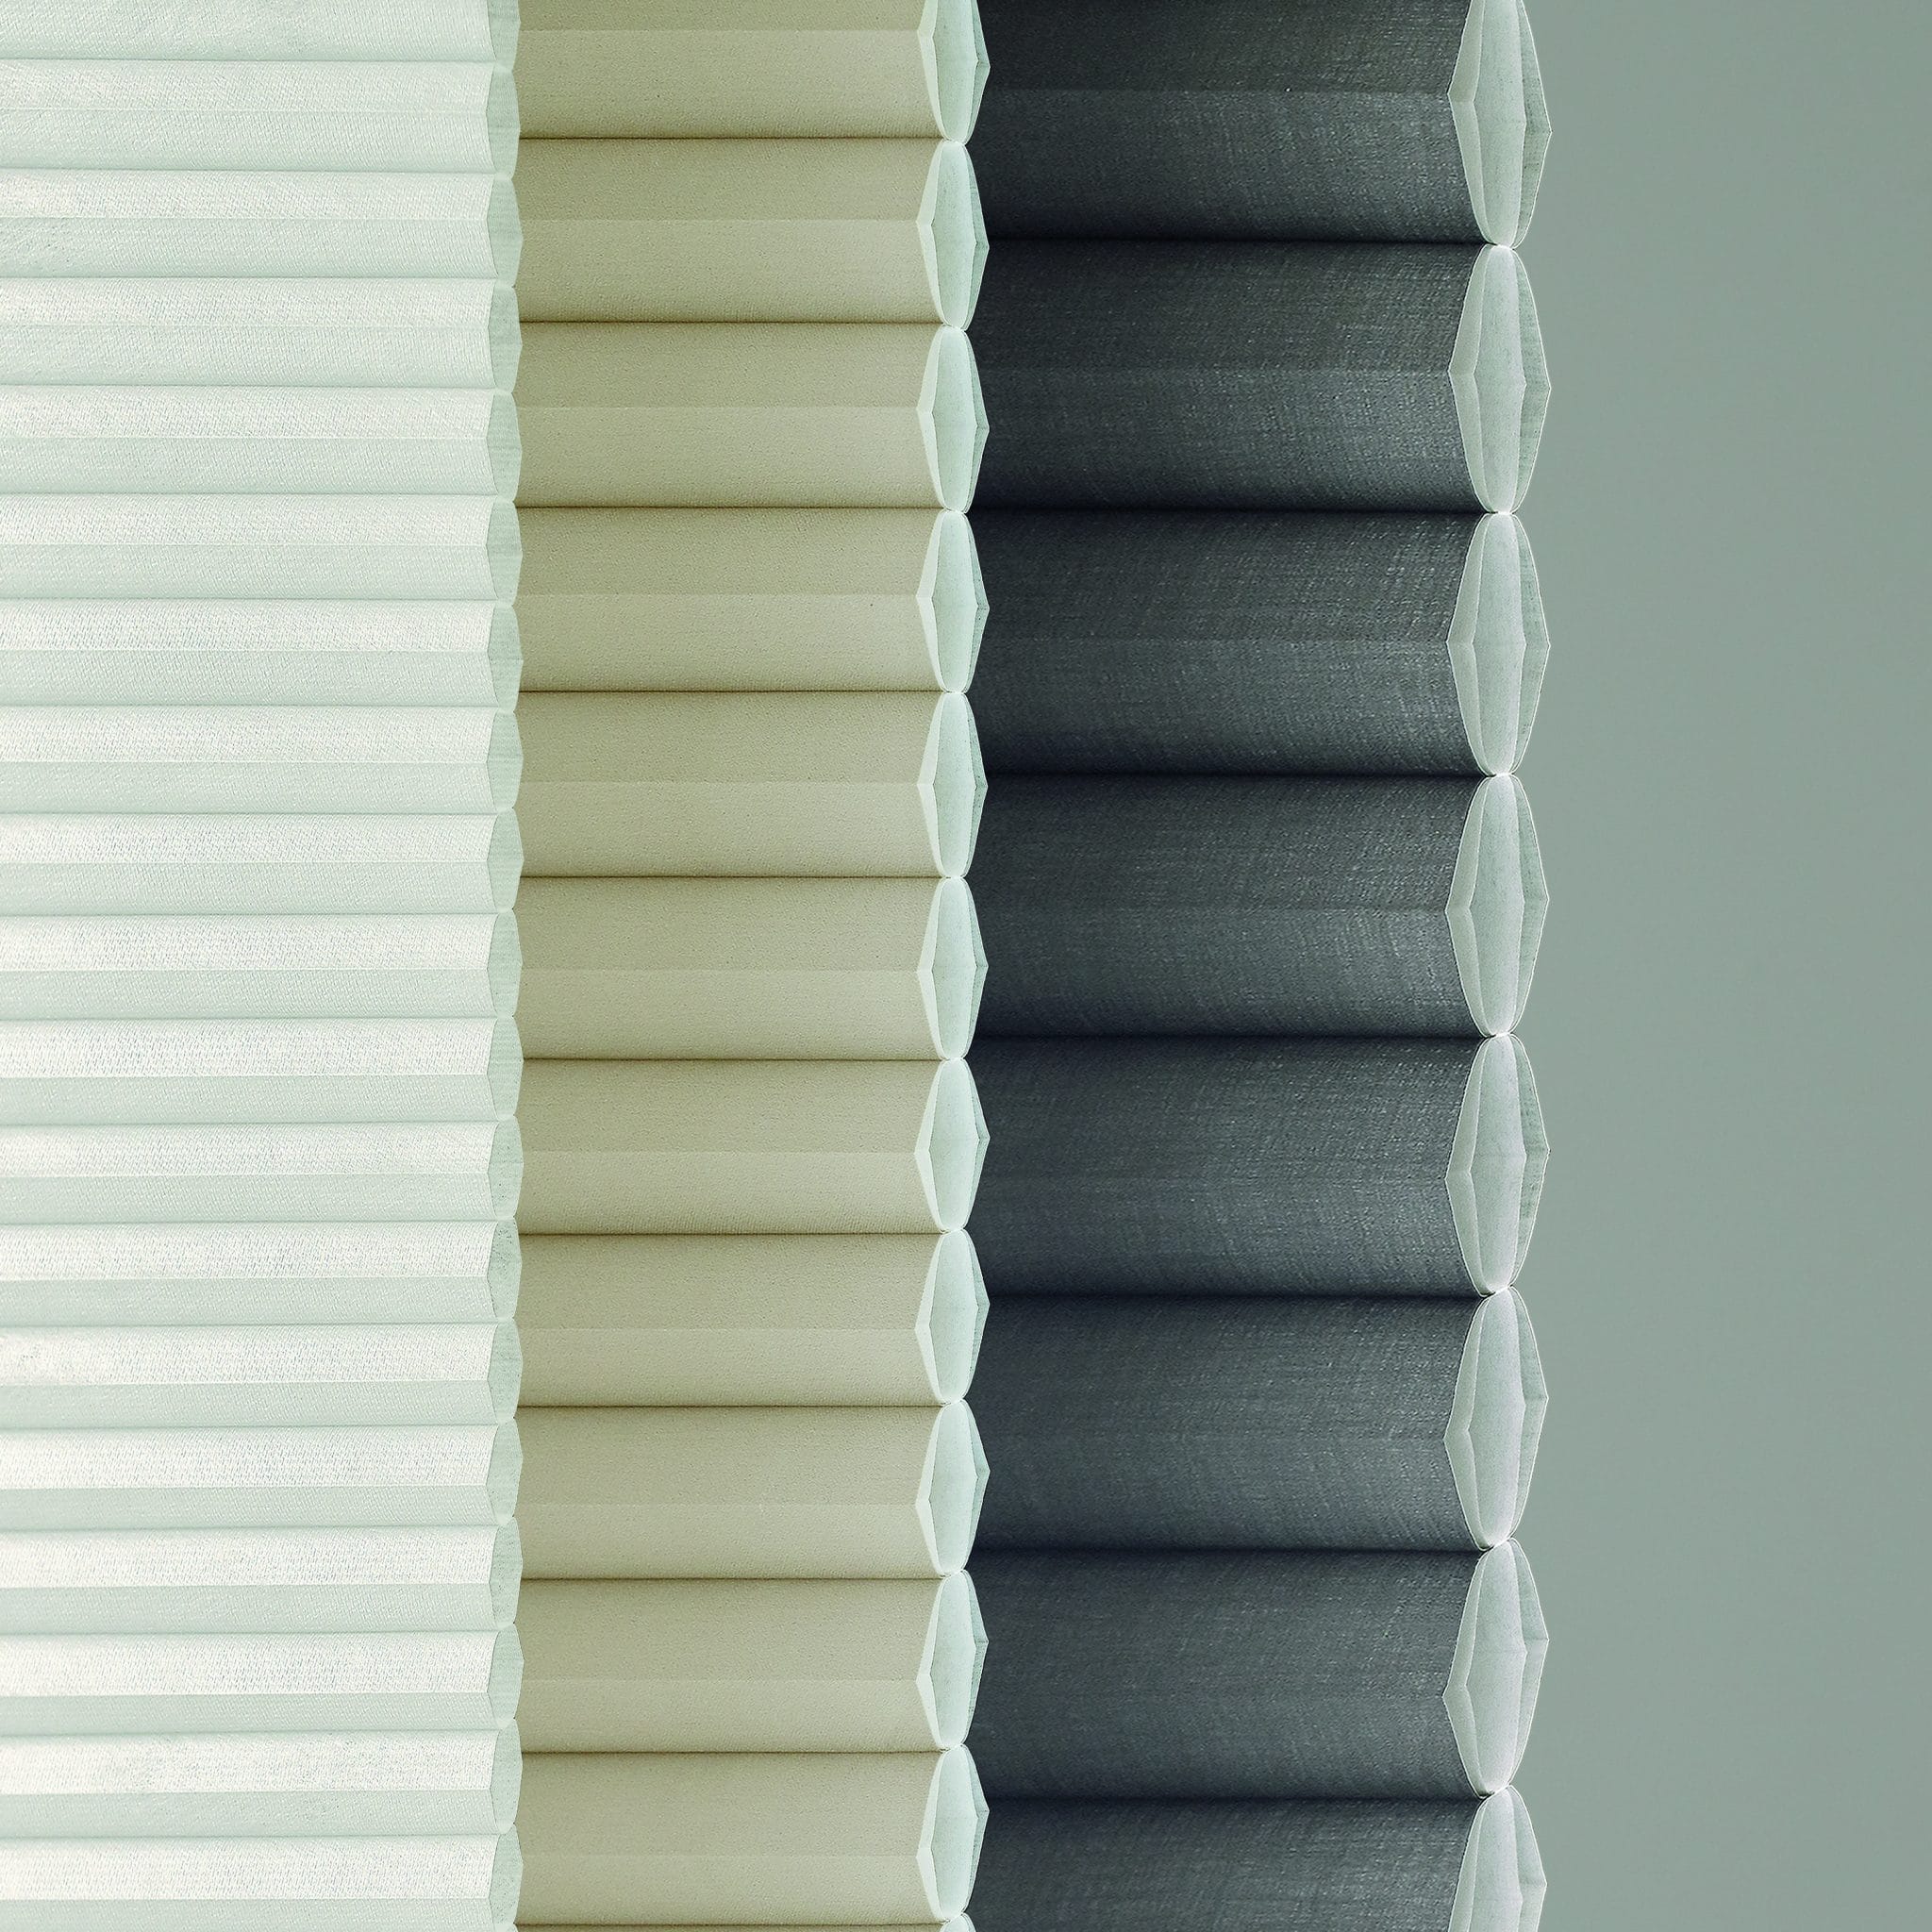 Duette® Shades Sydney Luxaflex A Style of Shade